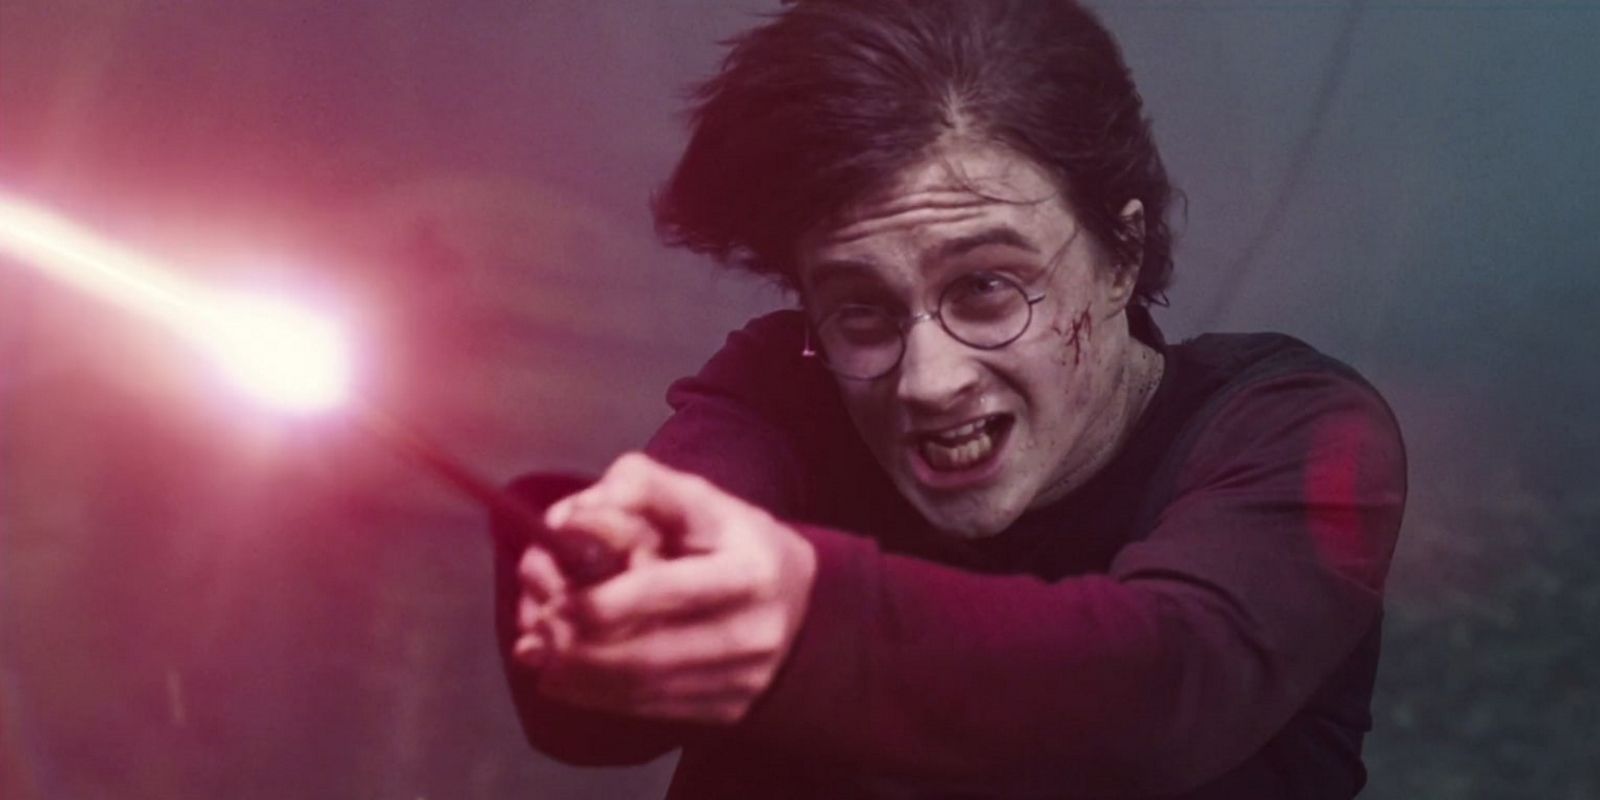 Harry Potter uses Expelliarmus in a duel against Voldemort